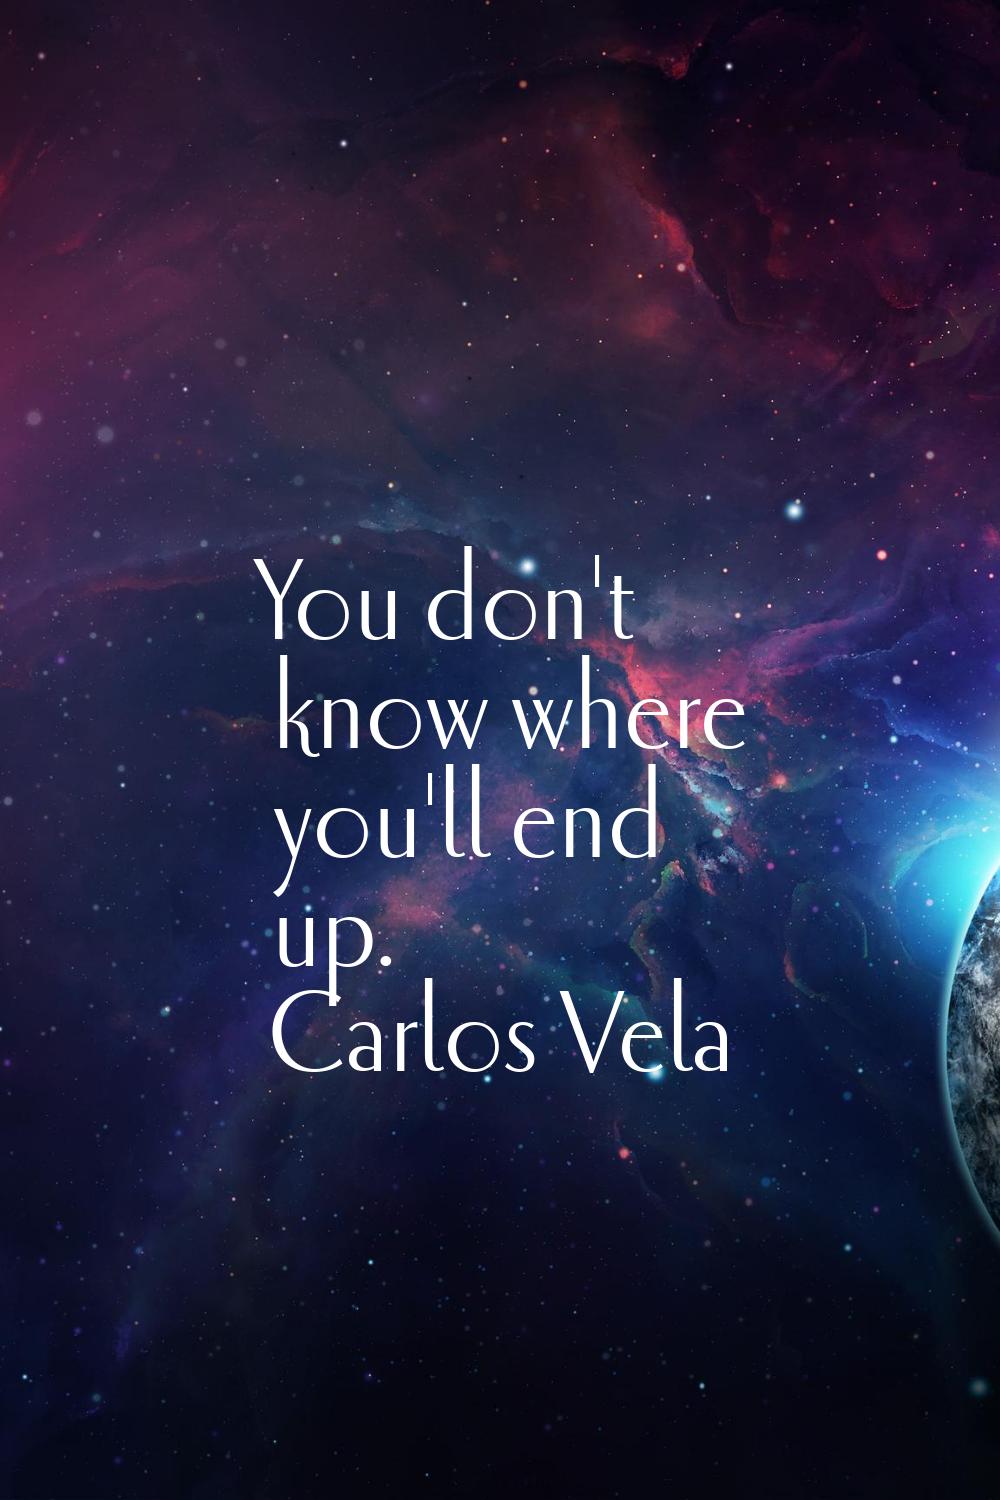 You don't know where you'll end up.